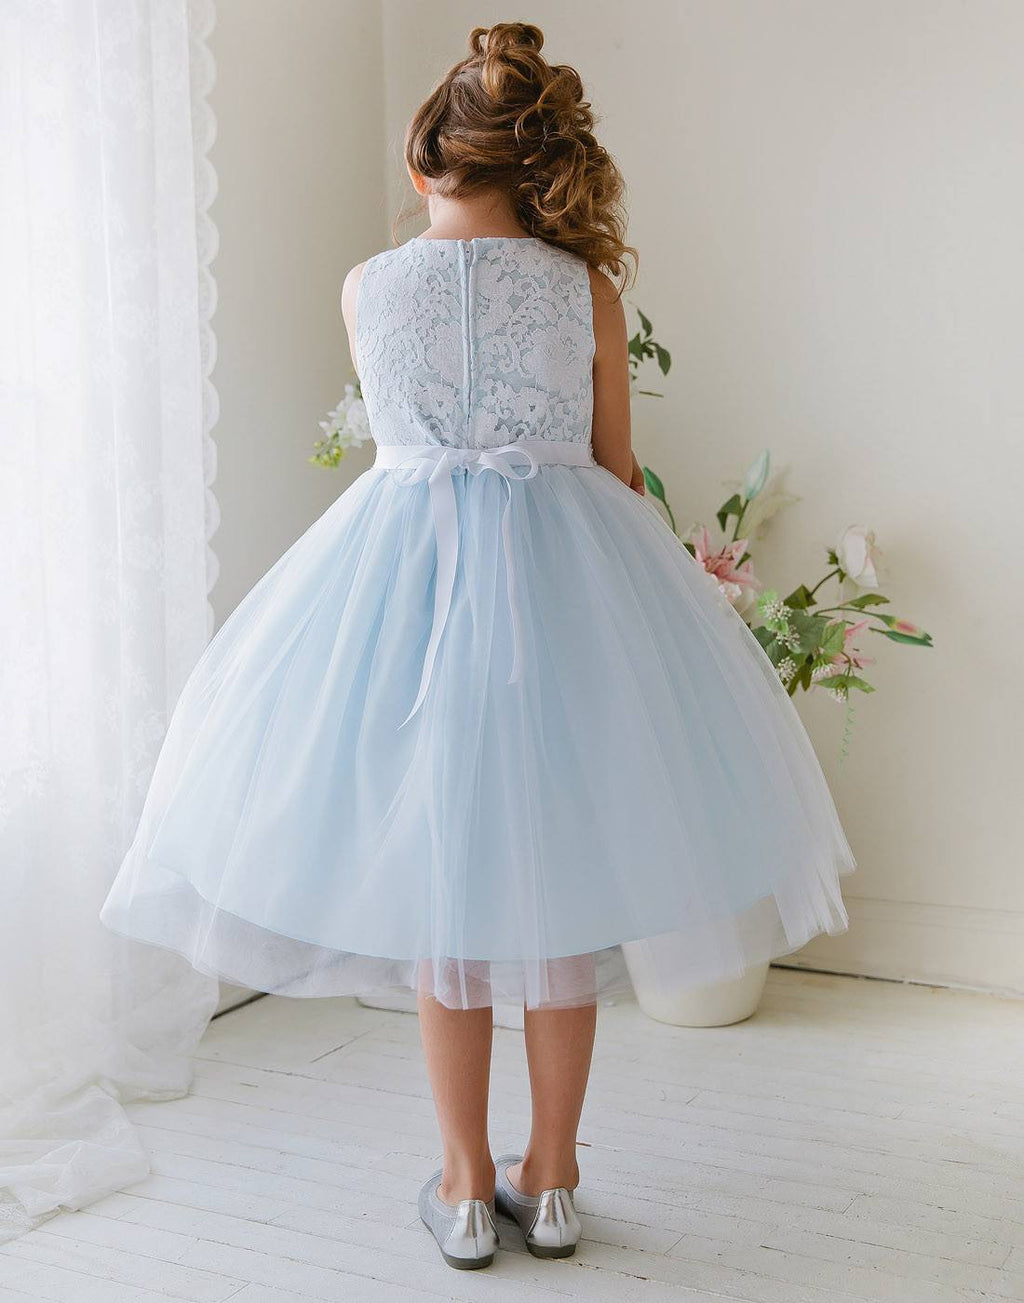 Glamorous and Lace tulle Dress with Flower Accented Belt - Light Blue ...